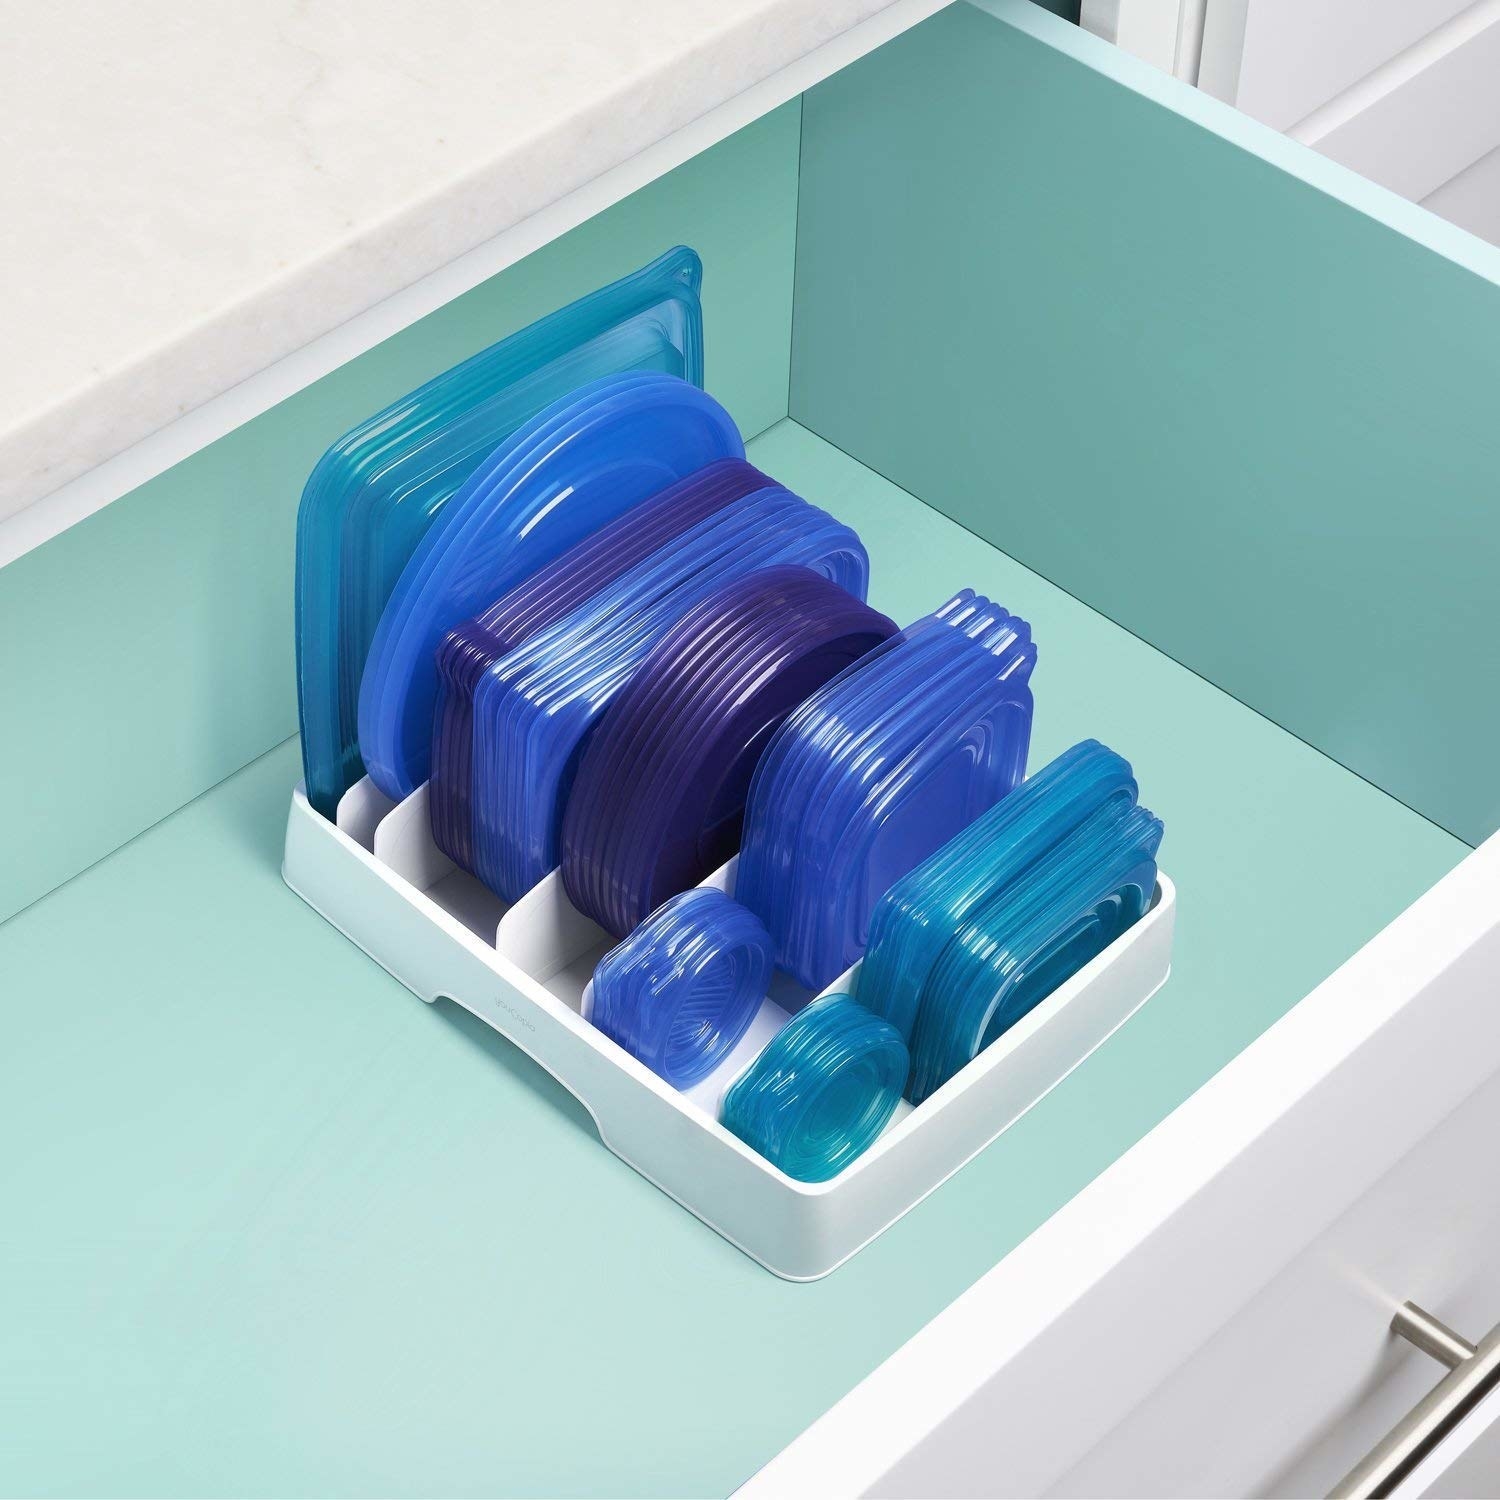 The organizer in a drawer holding six sizes of container lids